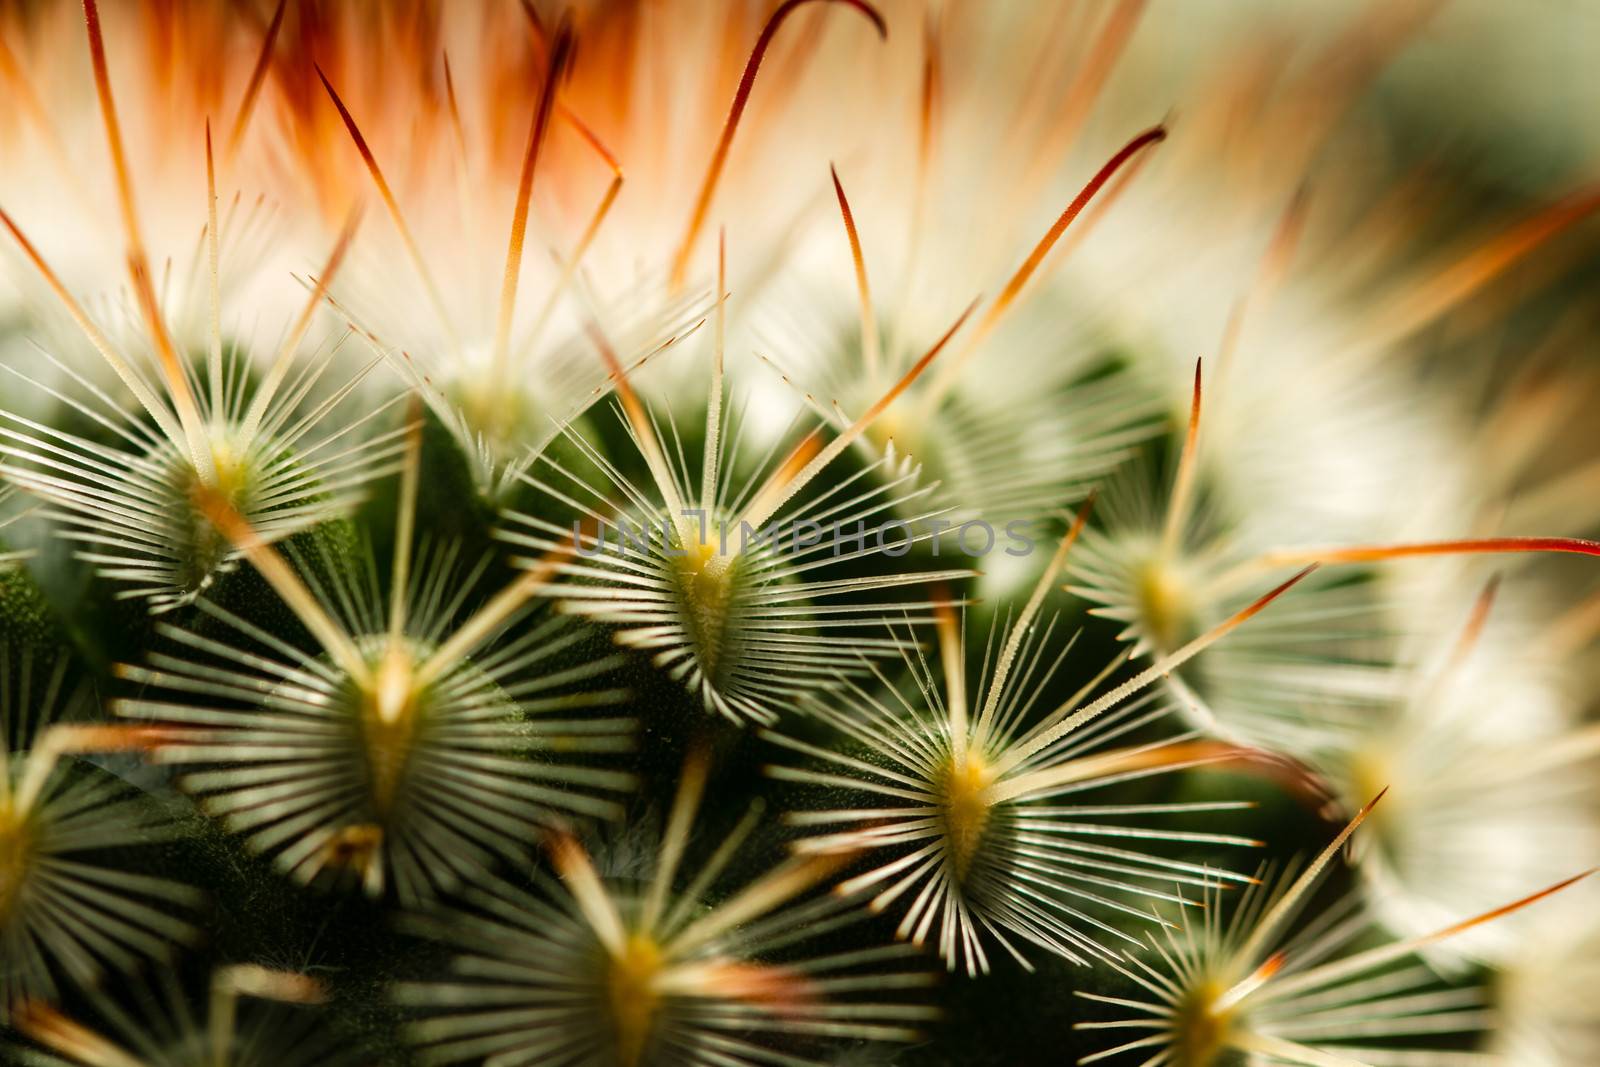 Extreme close up view of cactus thorn